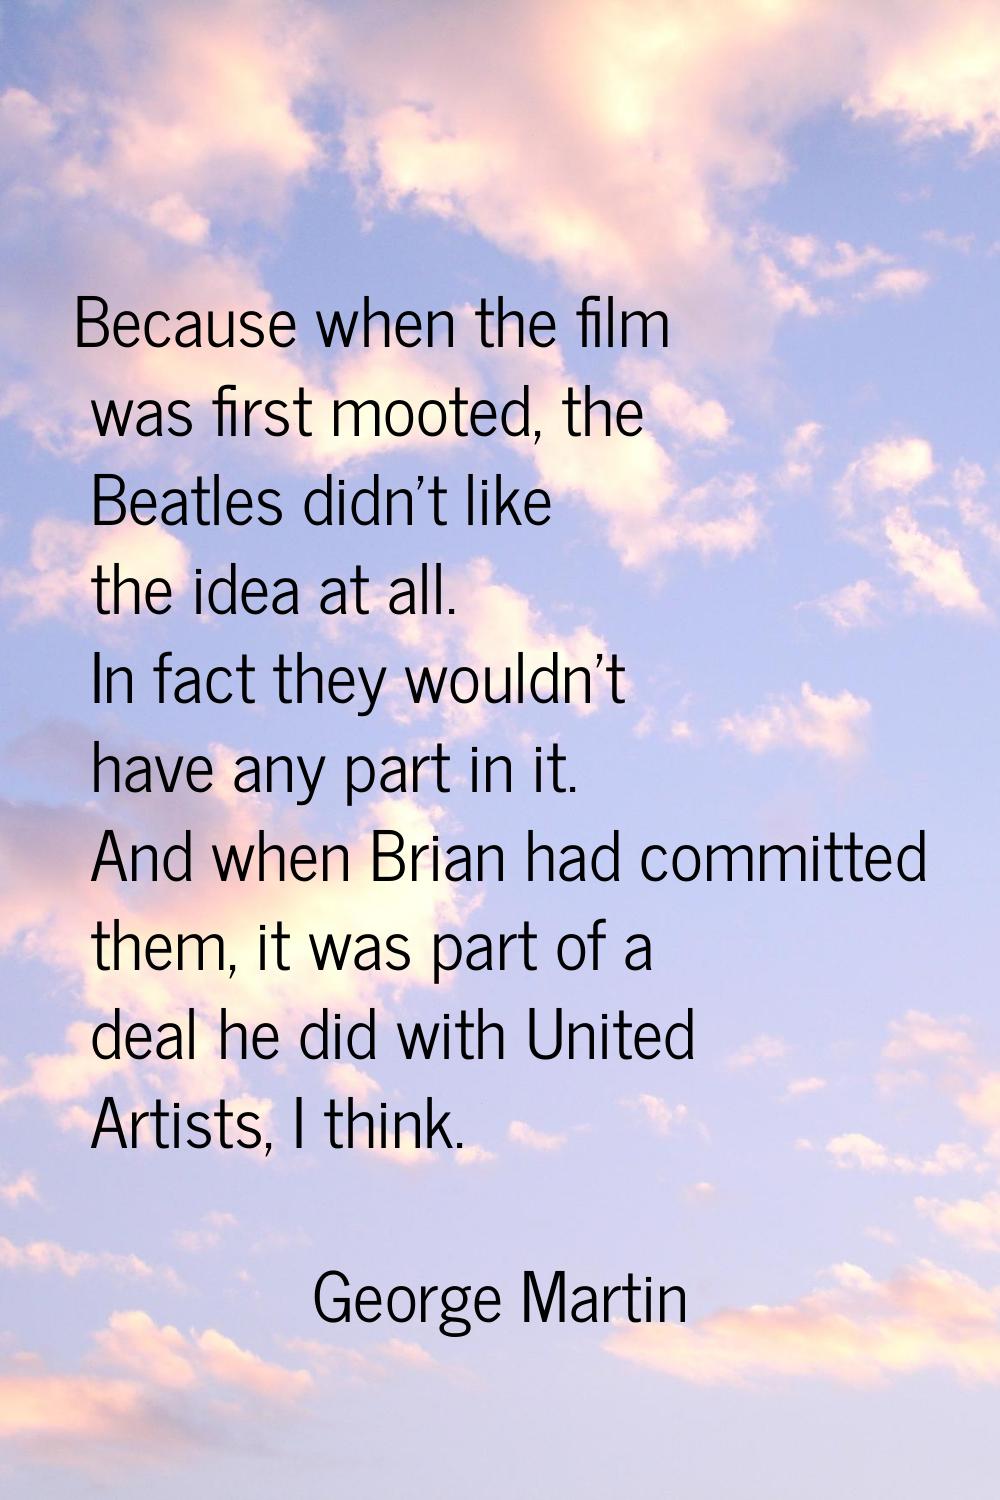 Because when the film was first mooted, the Beatles didn't like the idea at all. In fact they would